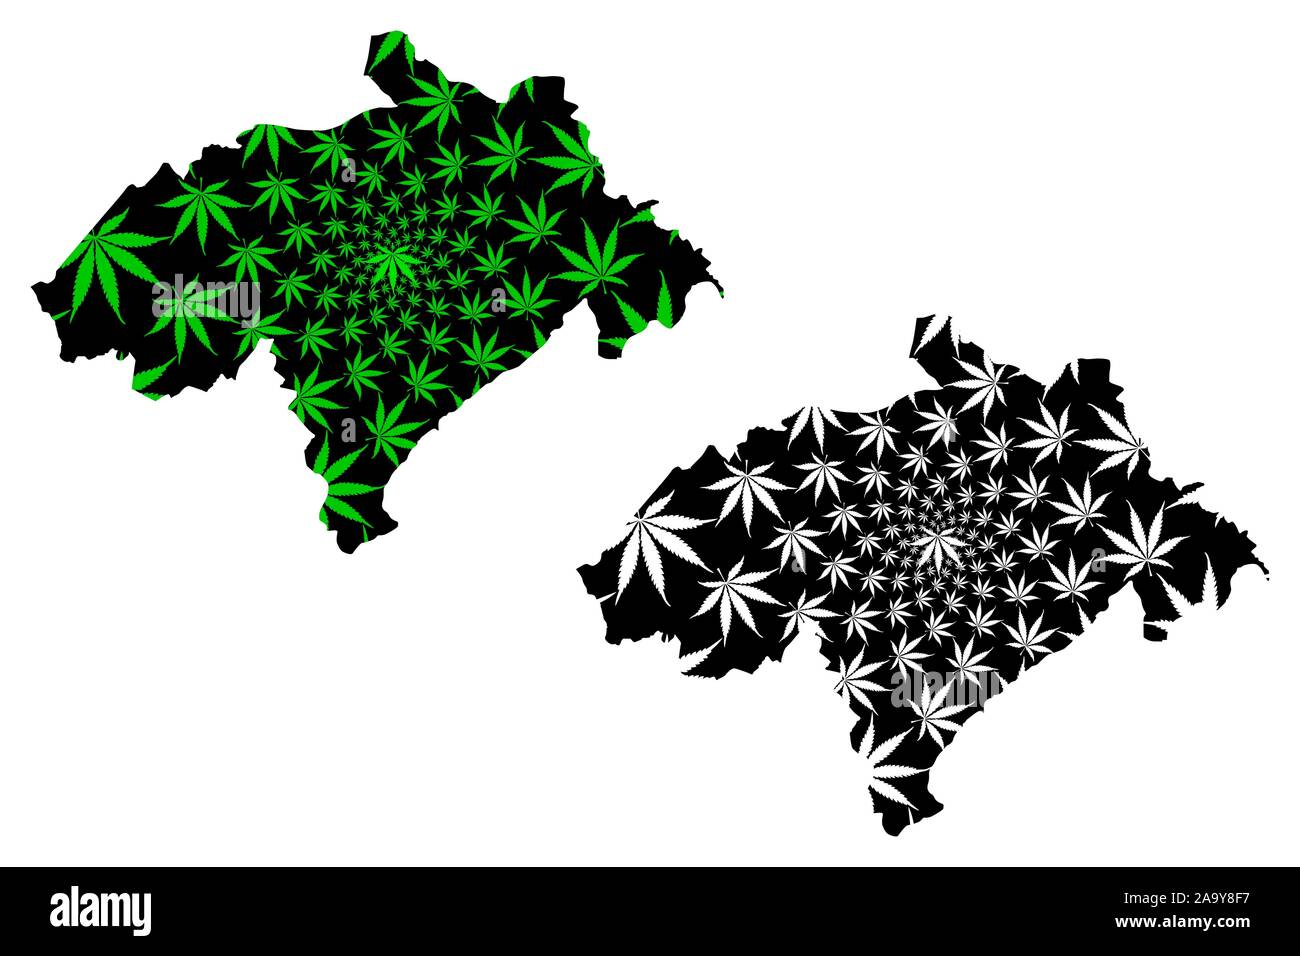 Midlothian (United Kingdom, Local government in Scotland) map is designed cannabis leaf green and black, Edinburghshire (County of Edinburgh) map made Stock Vector